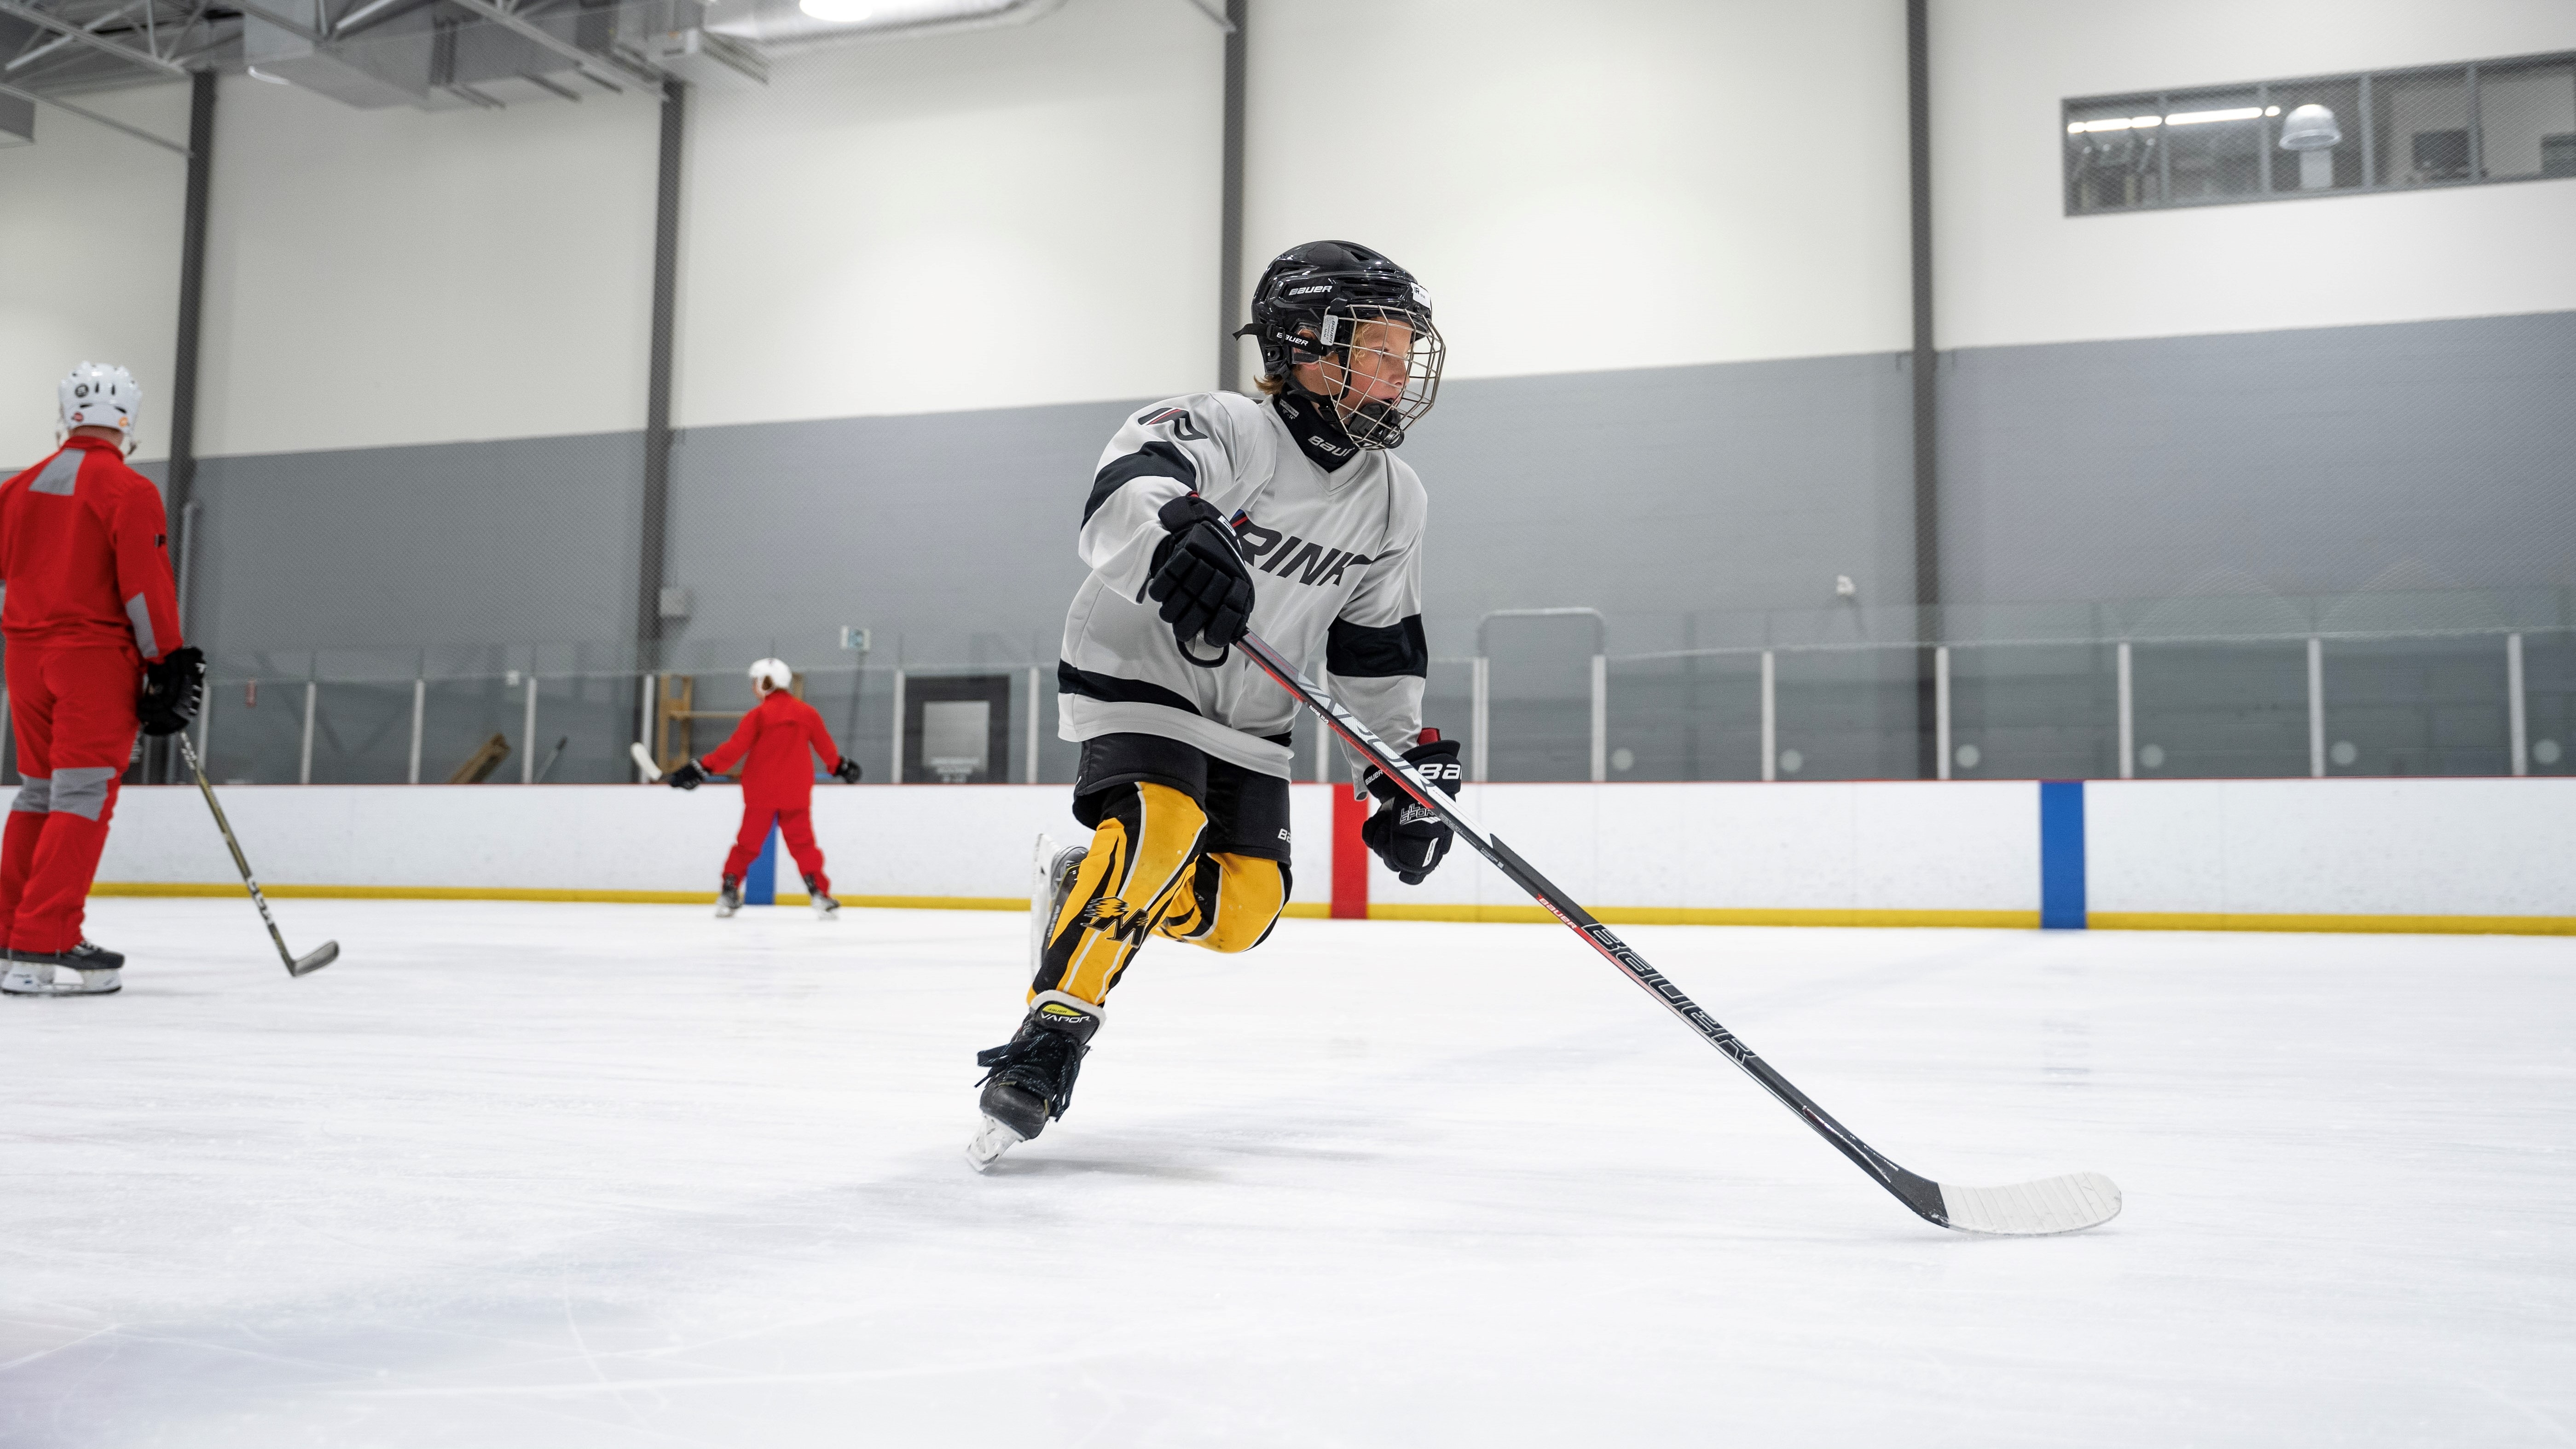 RINK Advanced Hockey Player Working On Power Skating Techniques